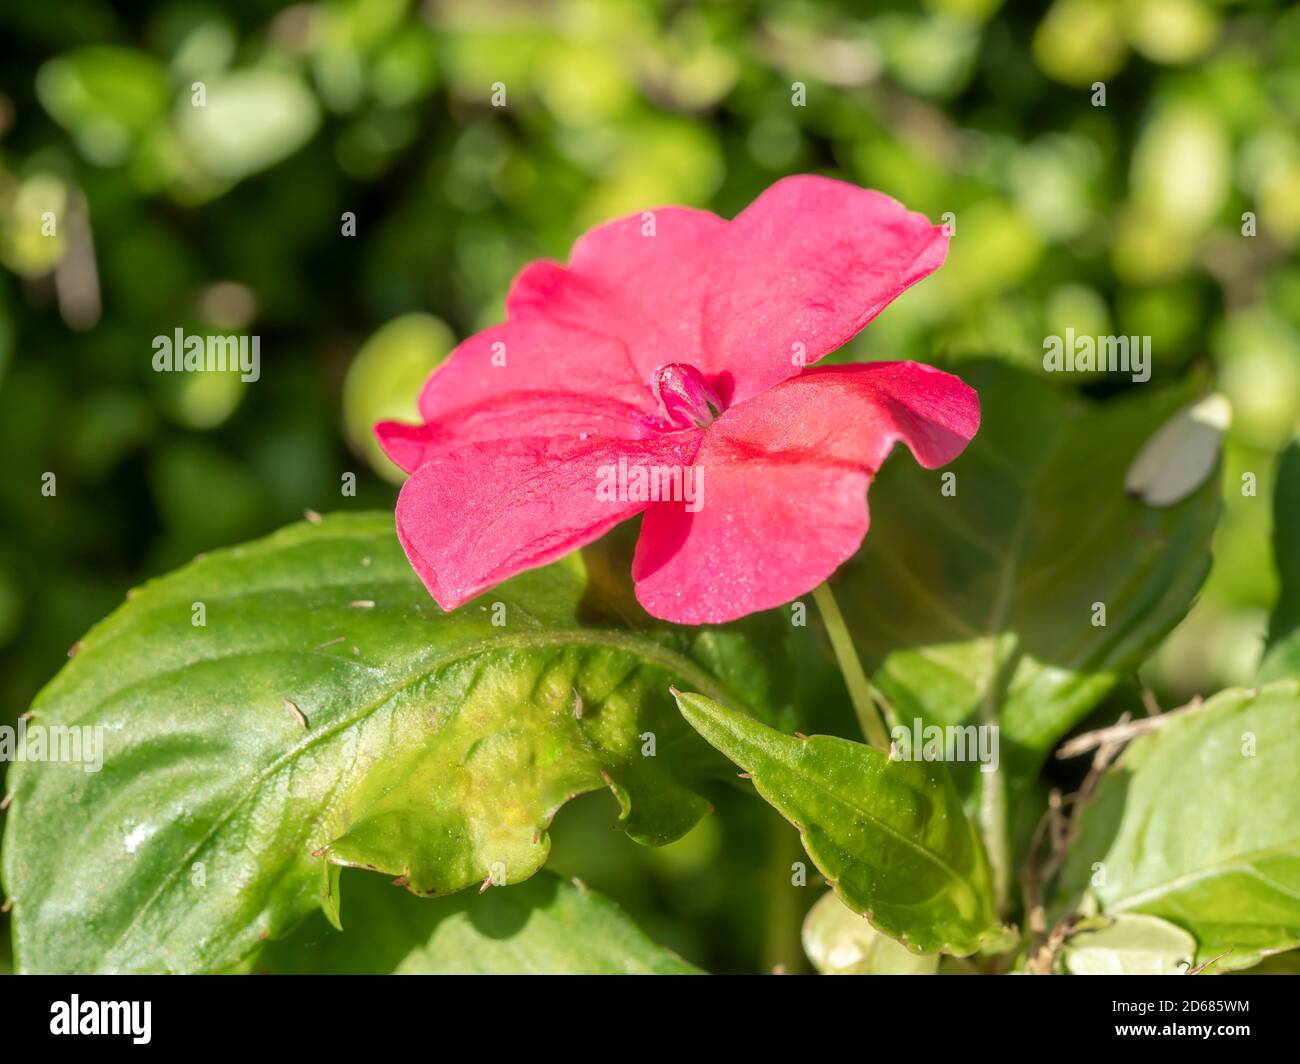 Closeup of a single pink Impatiens flower and green leaves Stock Photo